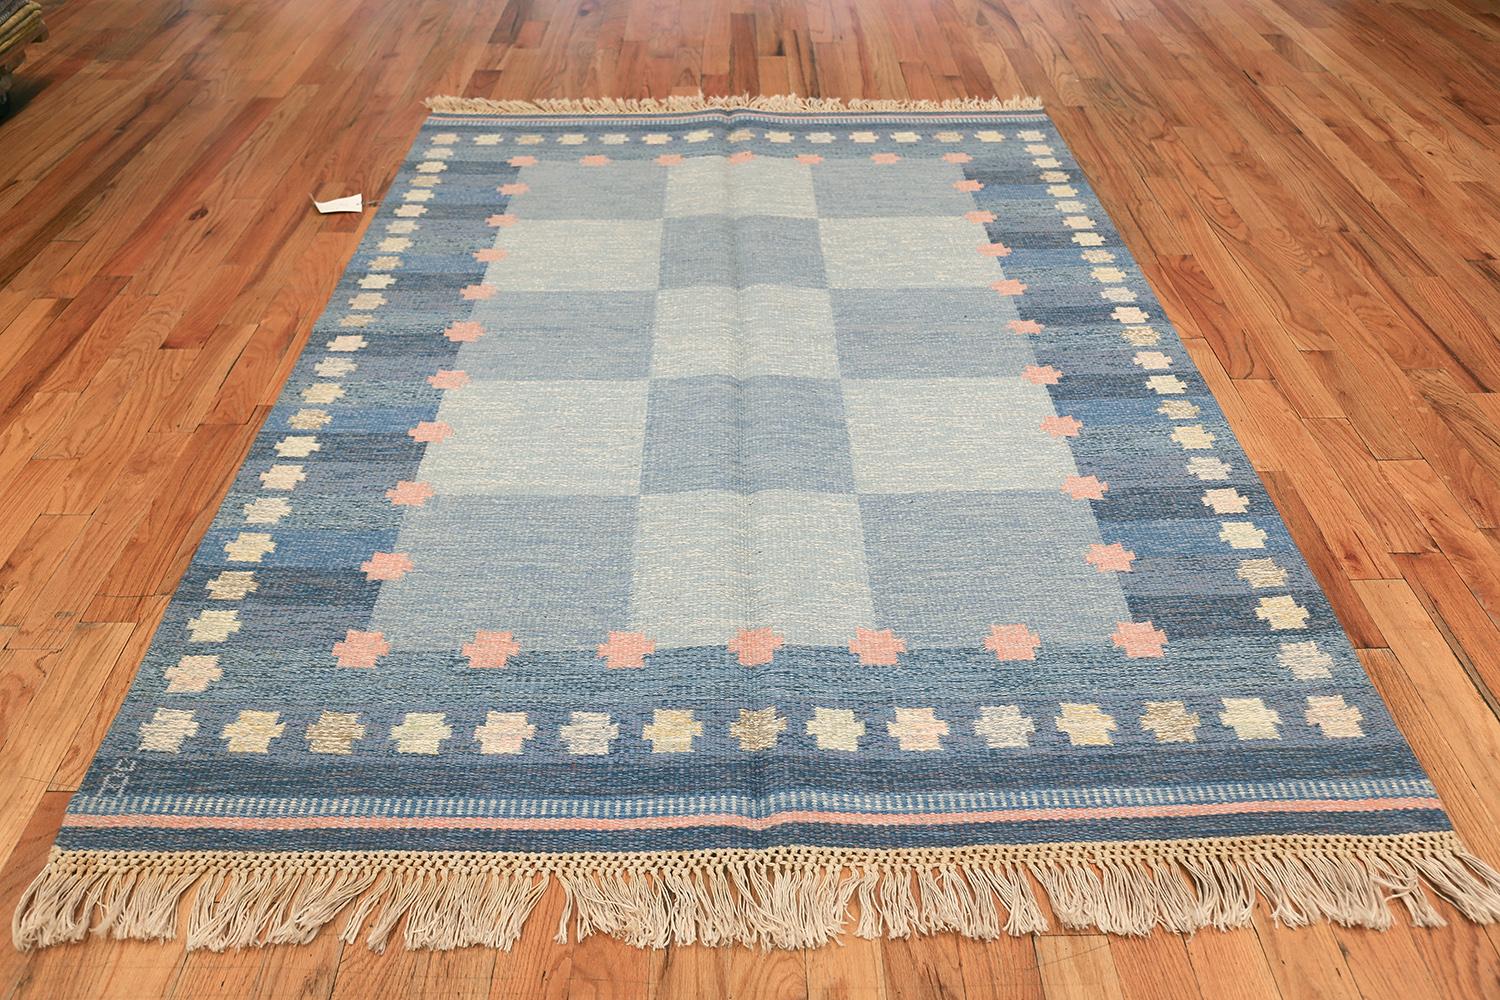 Vintage Swedish Kilim by Anna-Joanna Angstrom, Scandinavia, circa mid-20th century. Size: 5 ft 6 in x 7 ft 9 in (1.68 m x 2.36 m)

Here is a lovely and impeccably designed vintage carpet - a Swedish Kilim that was woven in Scandinavia during the